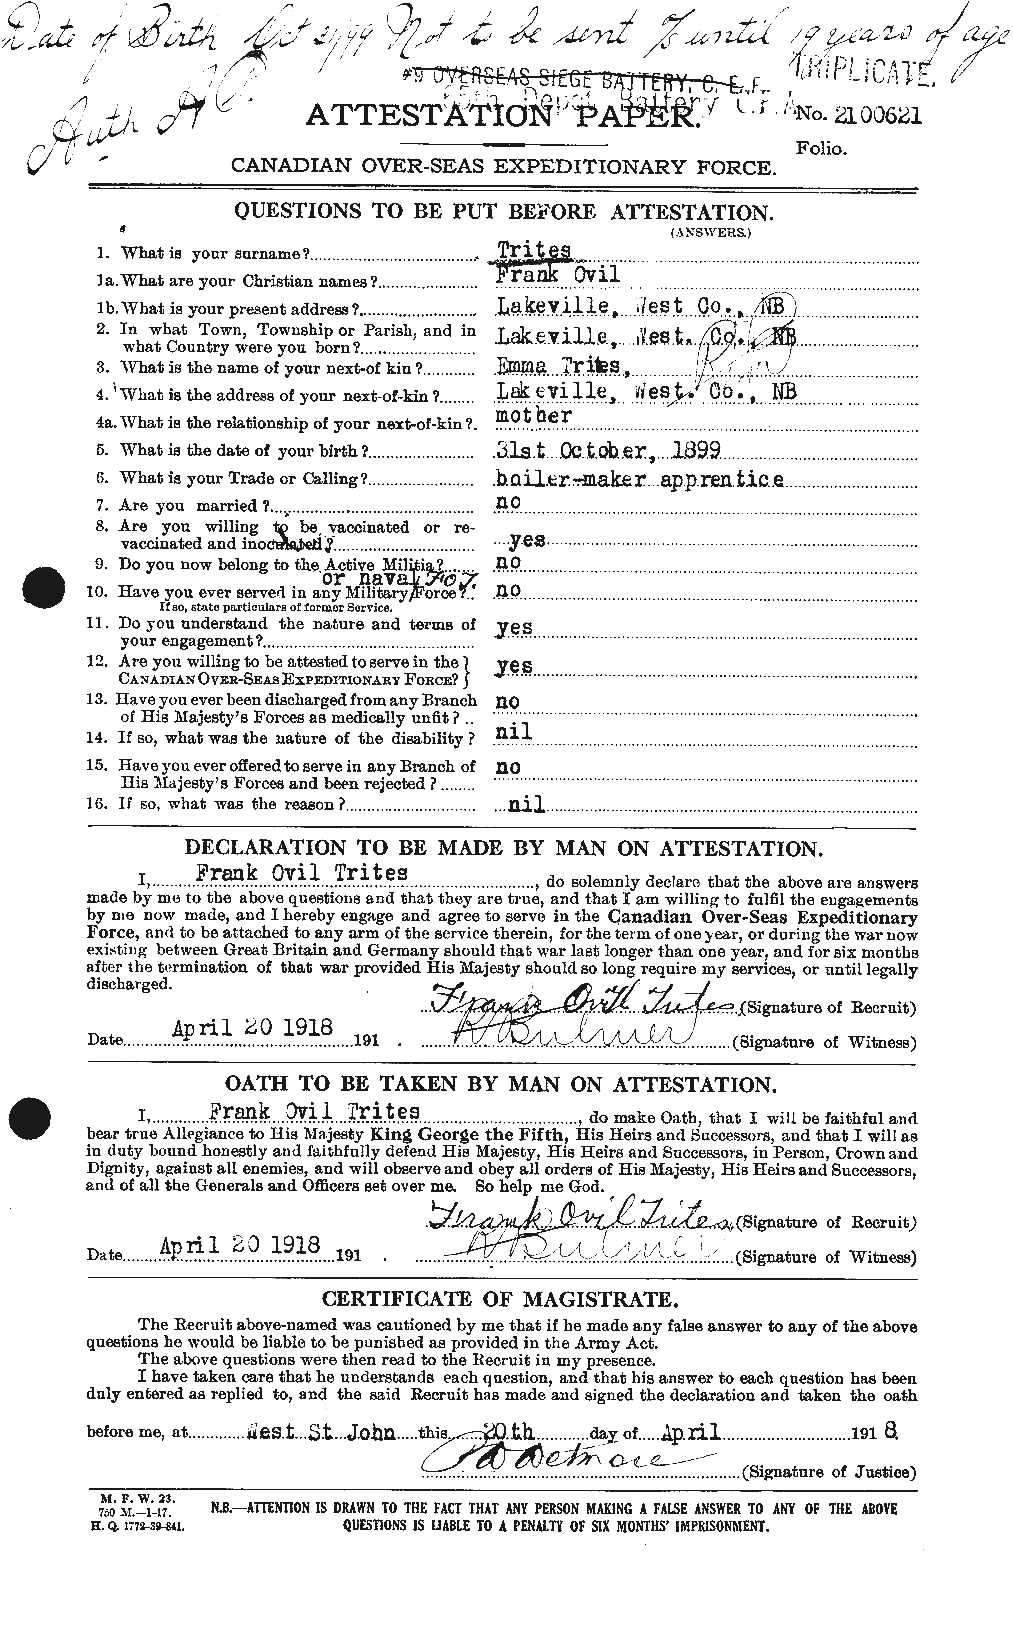 Personnel Records of the First World War - CEF 640148a